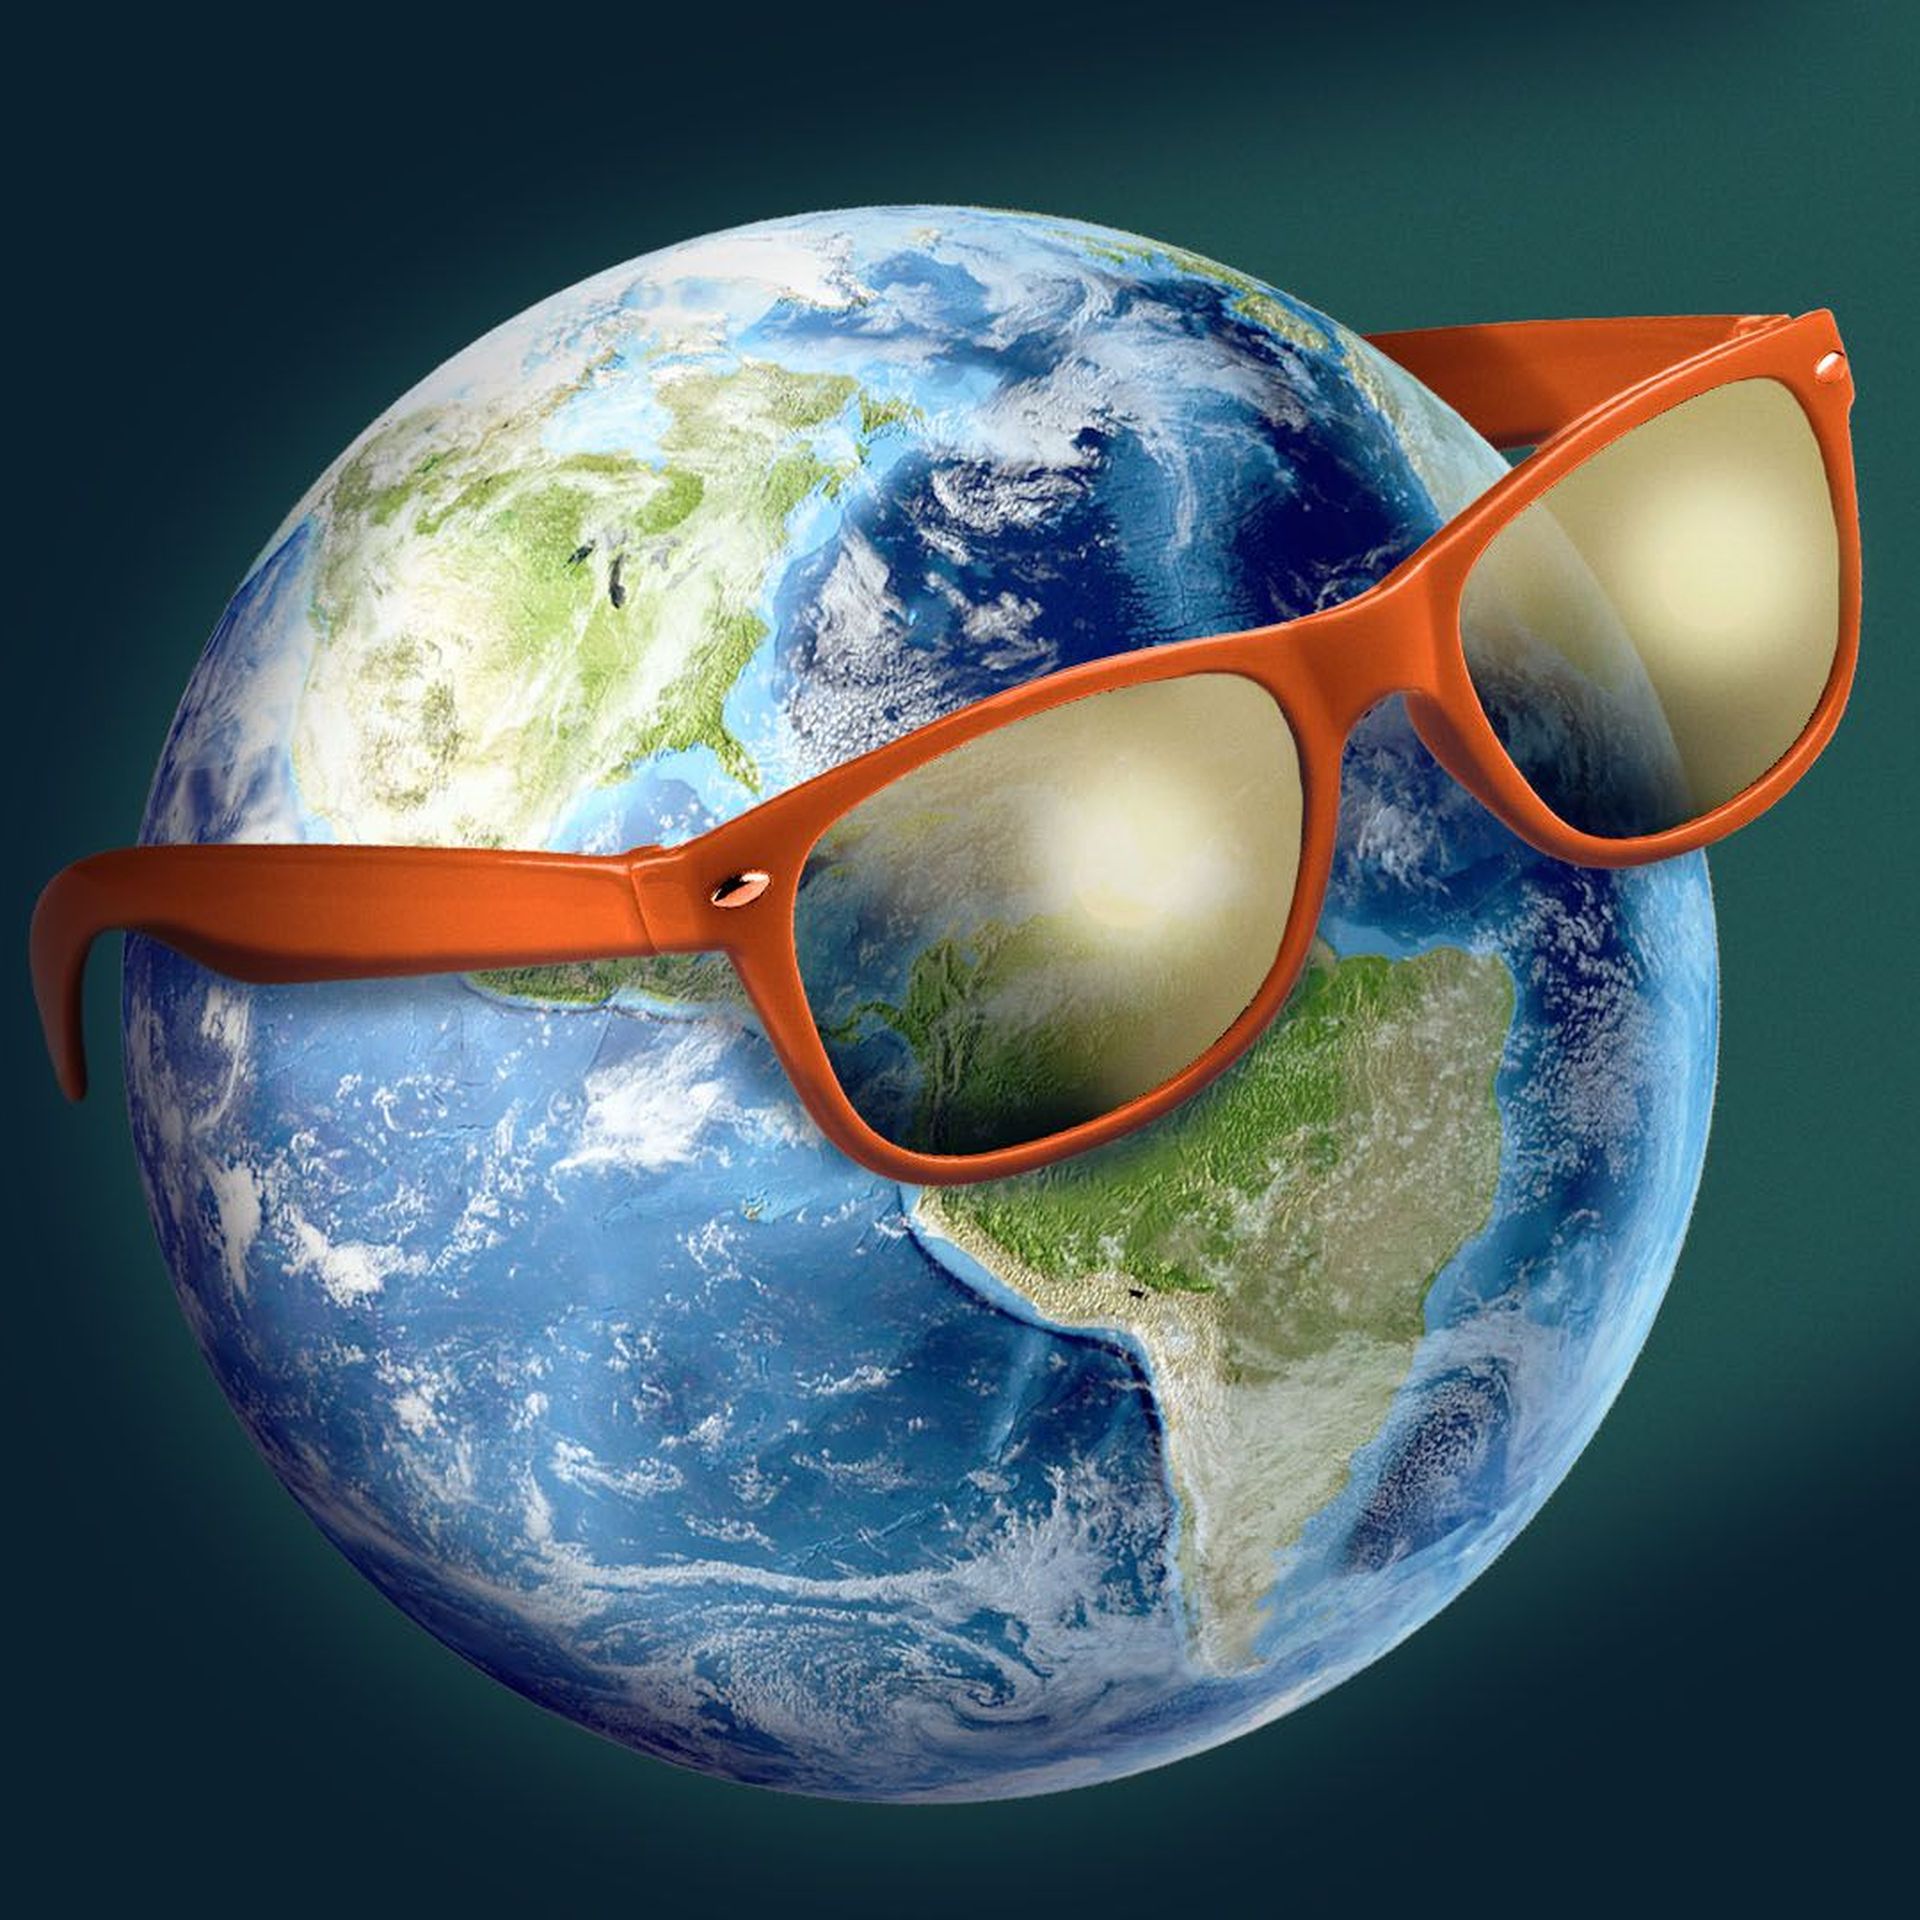 Illustration of the planet earth wearing a pair of sunglasses